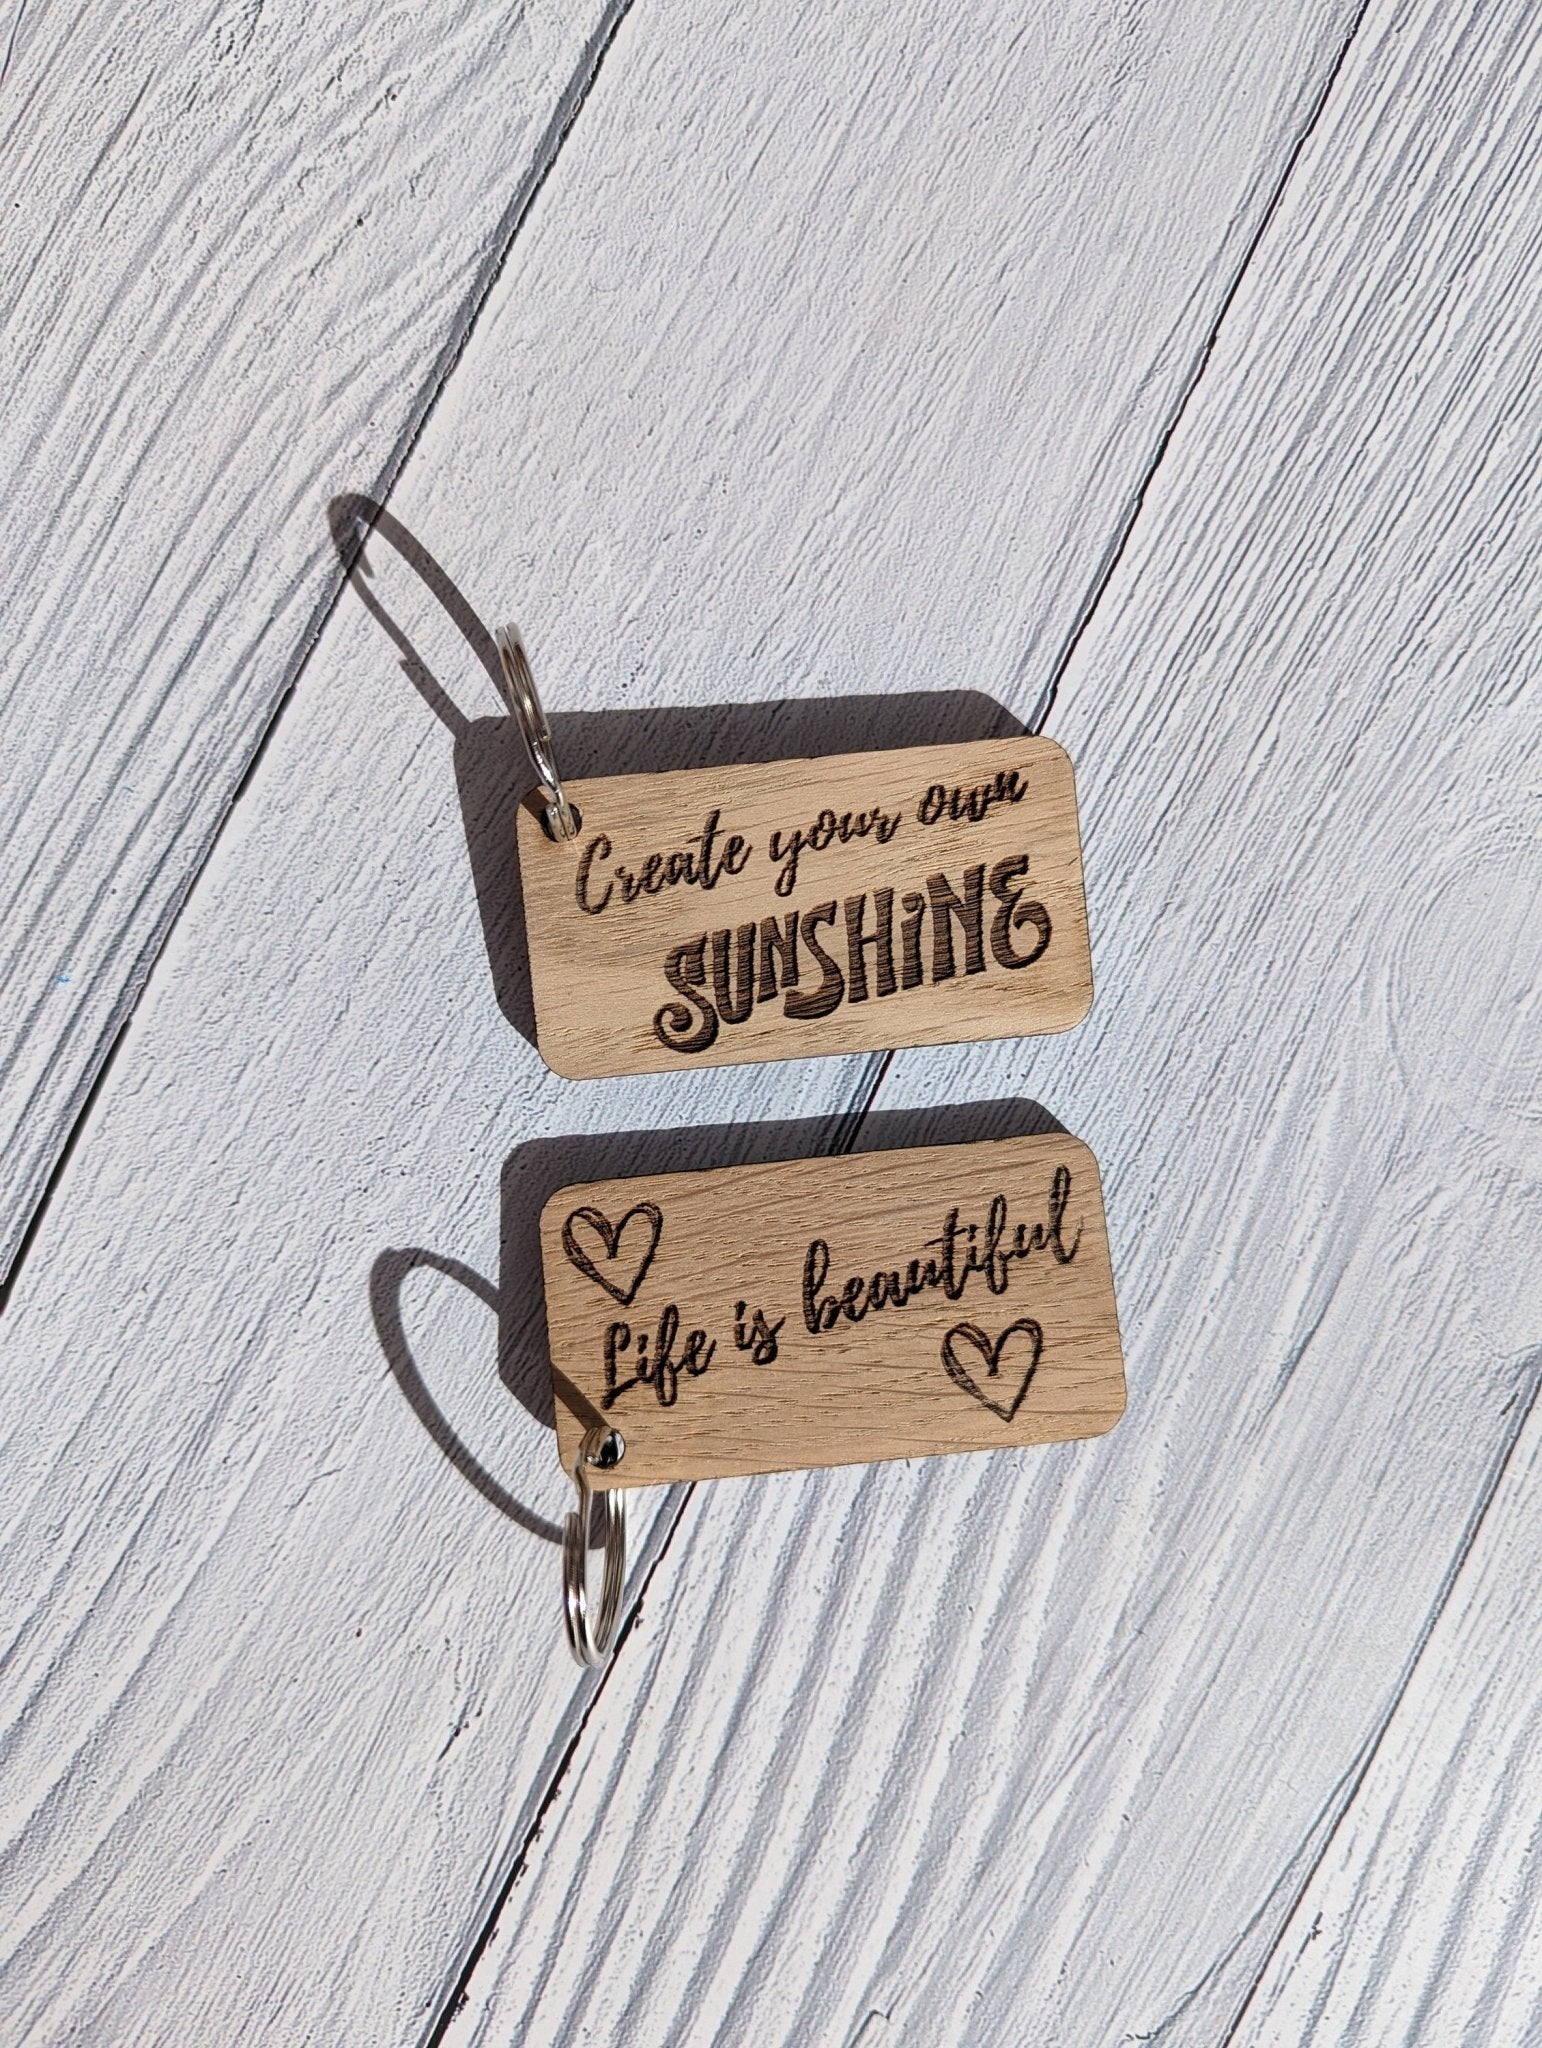 Uplifting Keyrings - 'Create Your Own Sunshine' or 'Life is Beautiful' - CherryGroveCraft